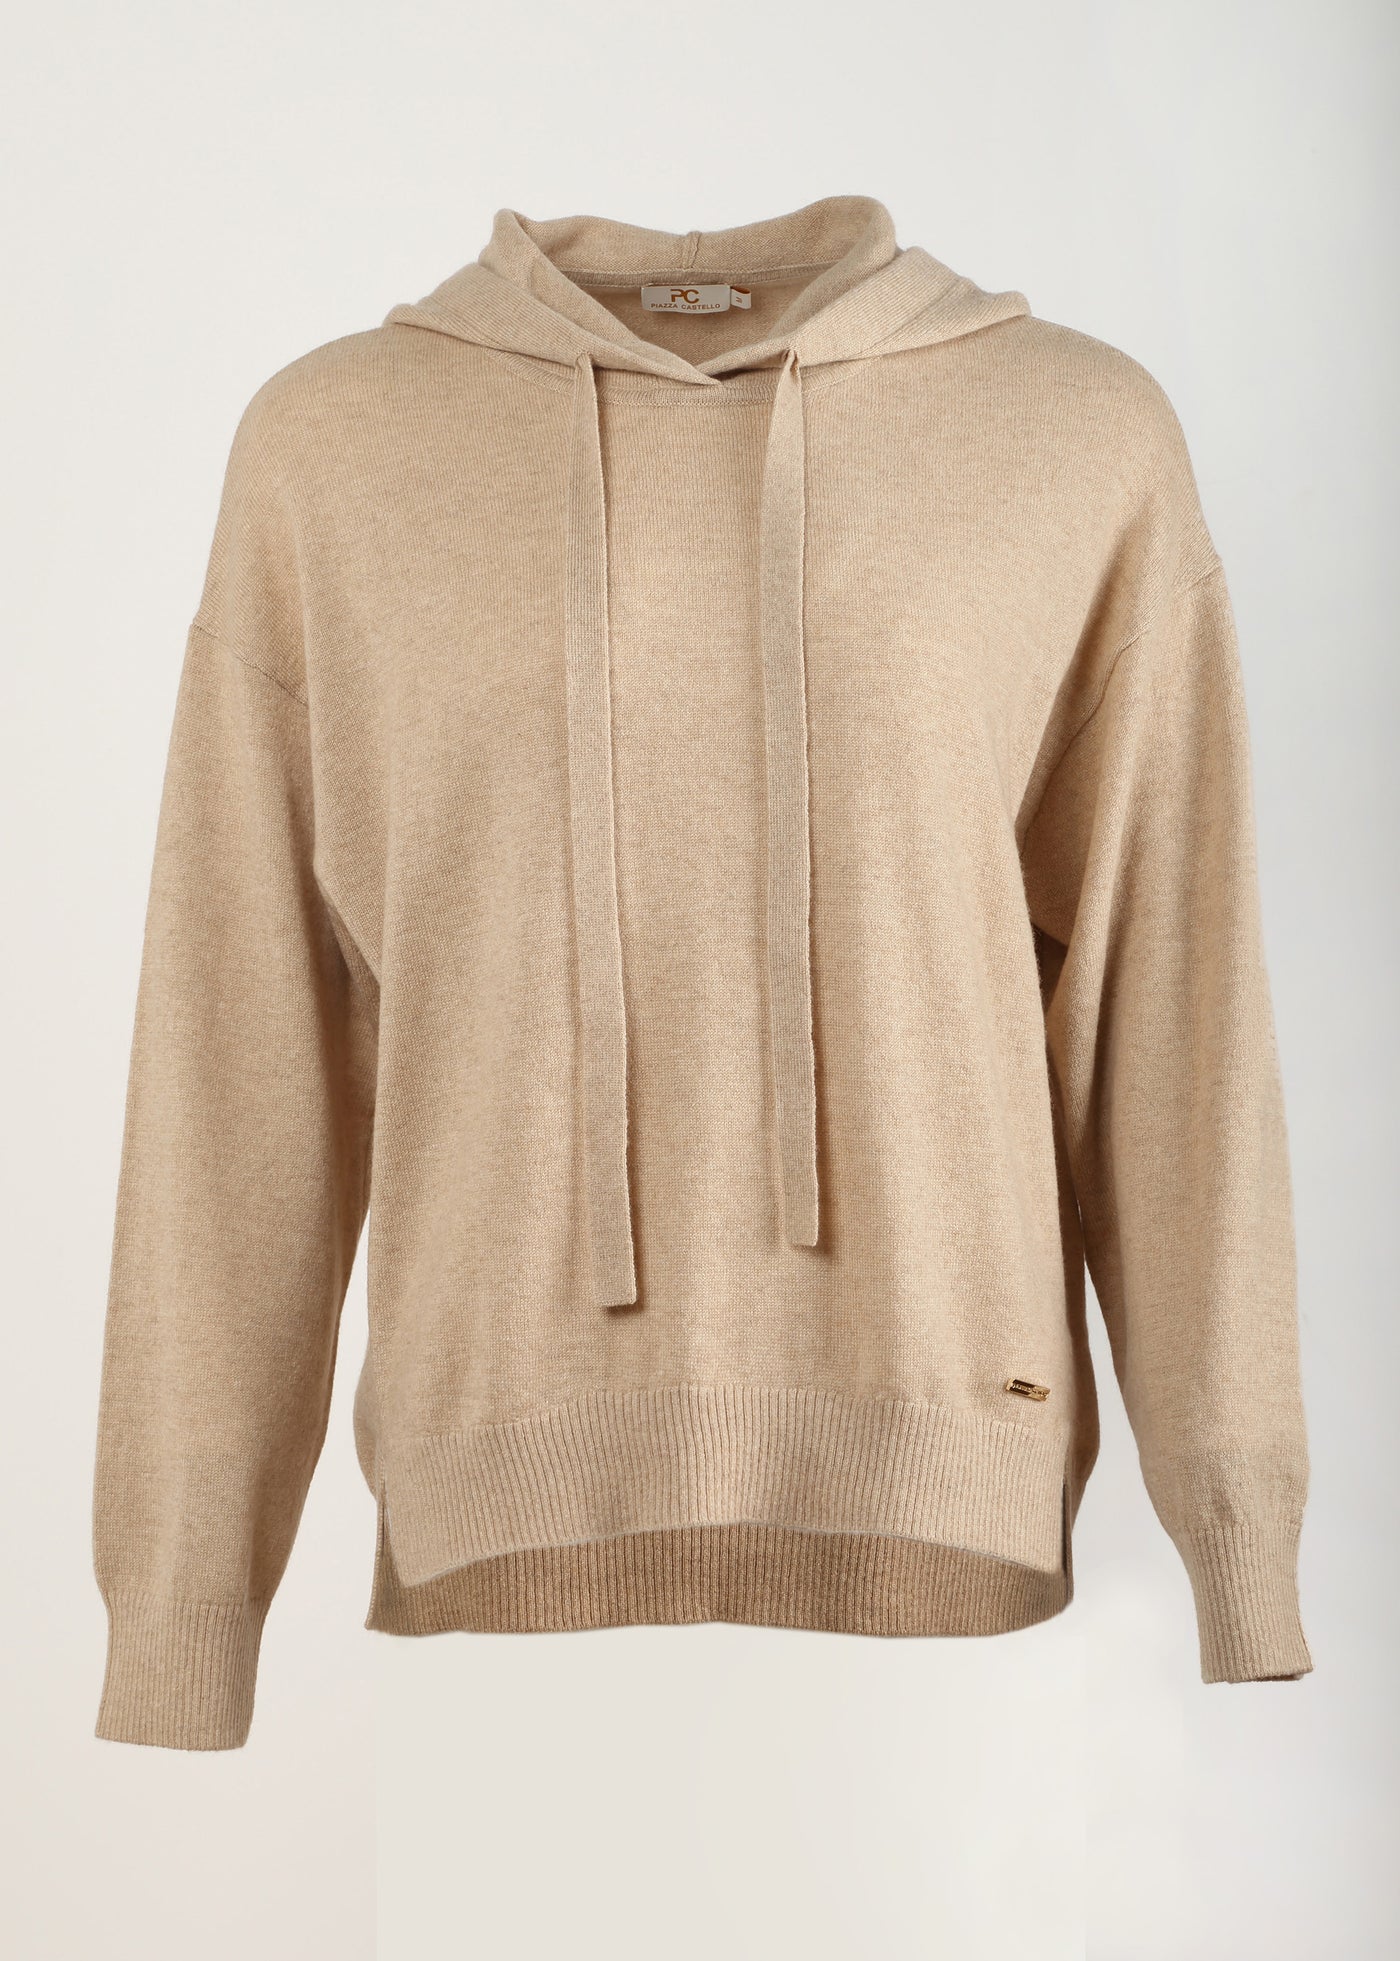 Women's Hoodie Cashmere Pullover